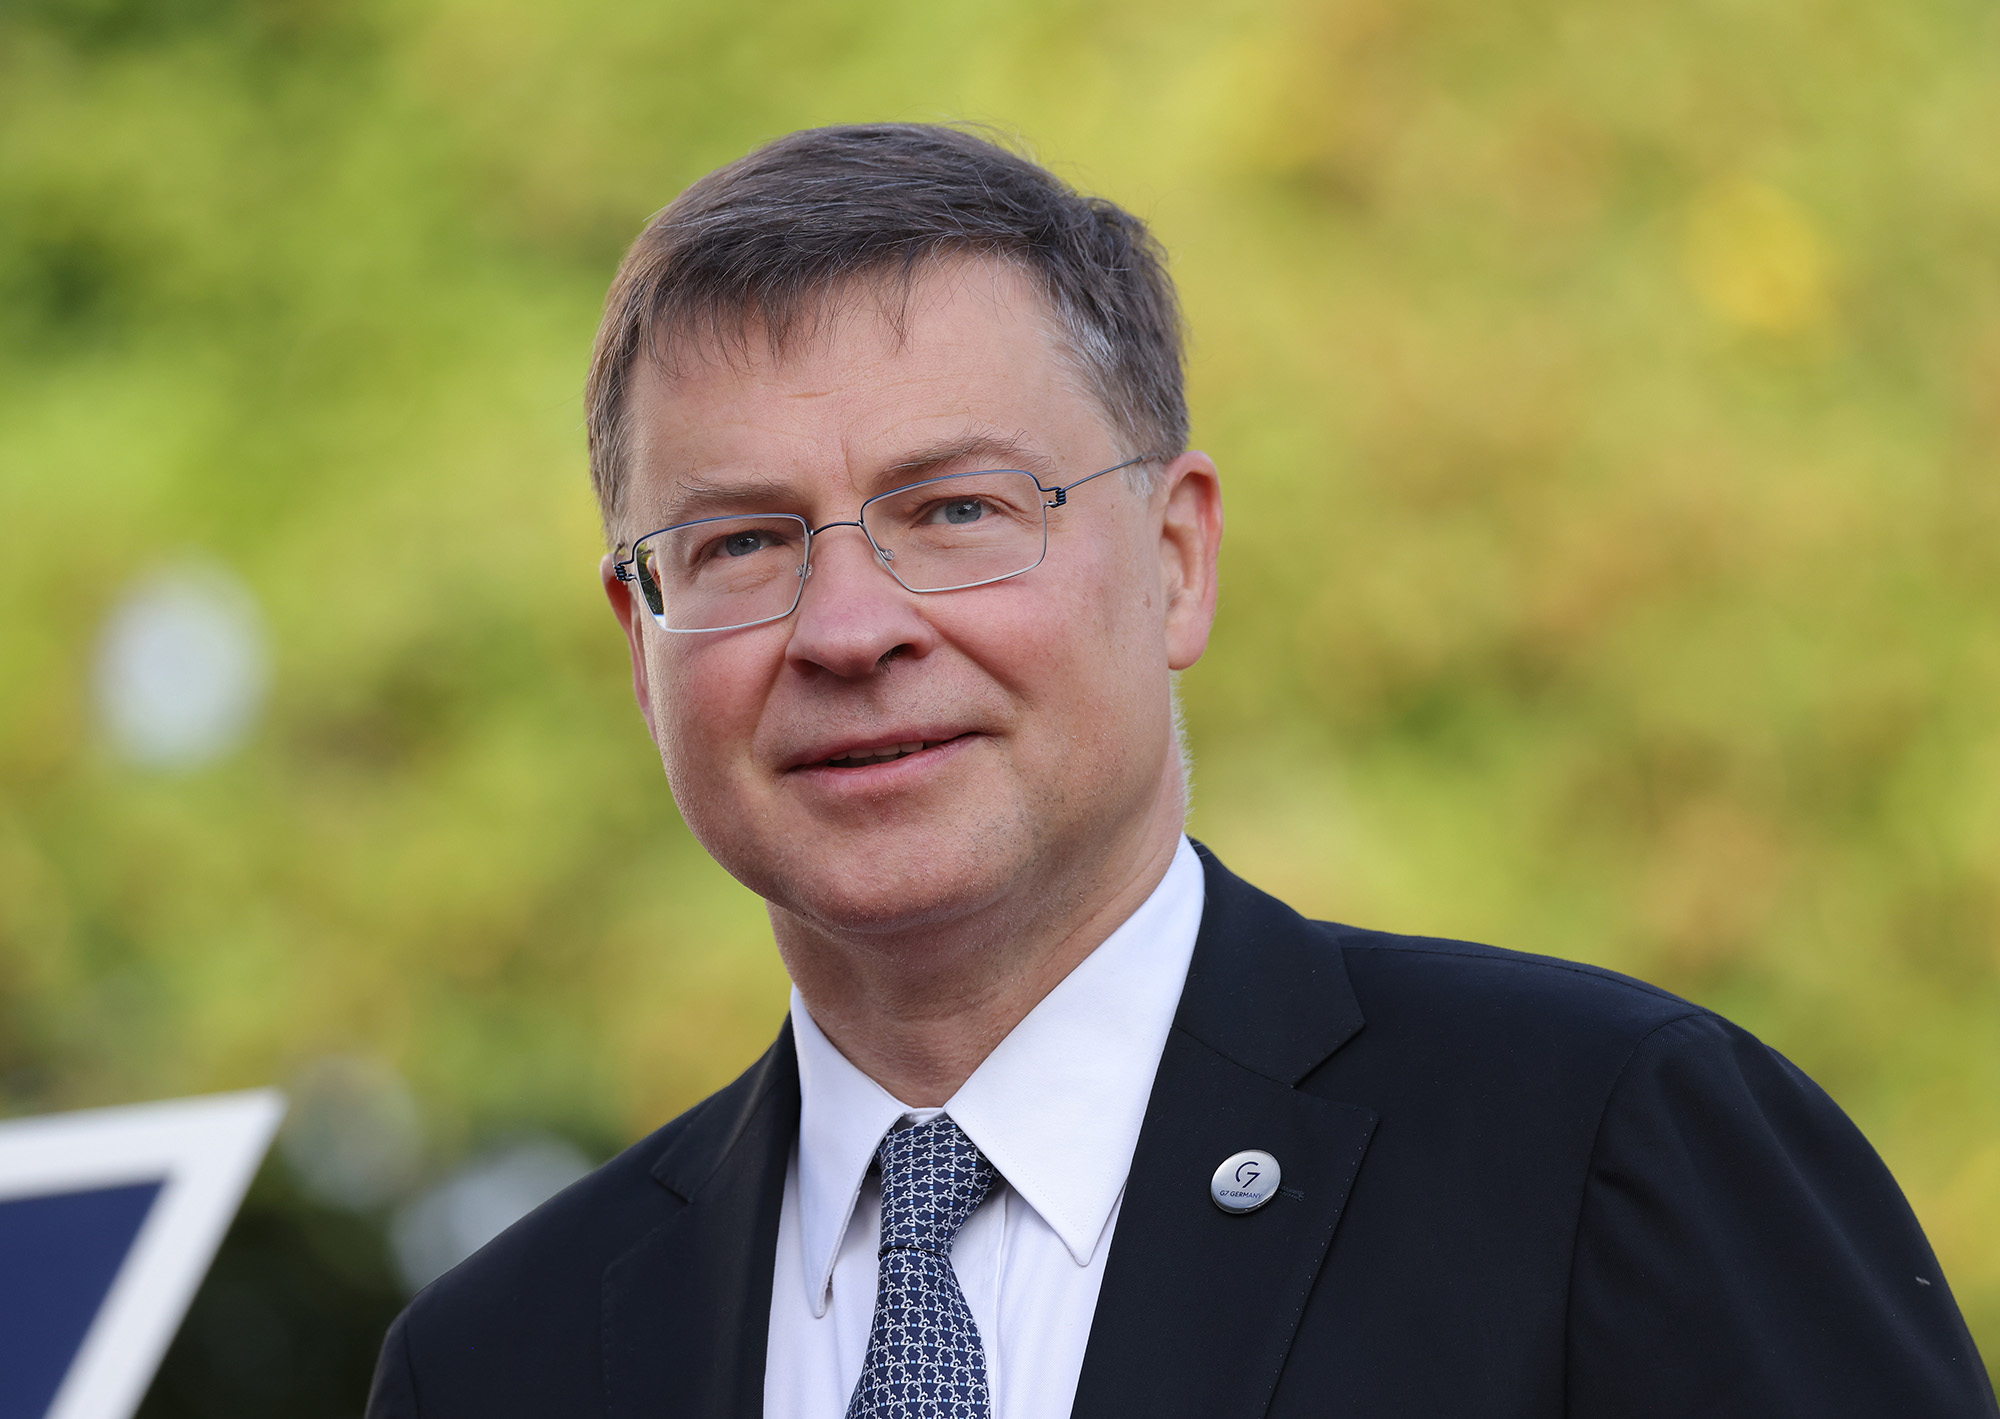 European Union Executive Vice-President, Commissioner for Trade Valdis Dombrovskis attends a meeting of G7 nations trade ministers and representatives at Schloss Neuhardenberg on September 15, in Neuhardenberg, Germany. 